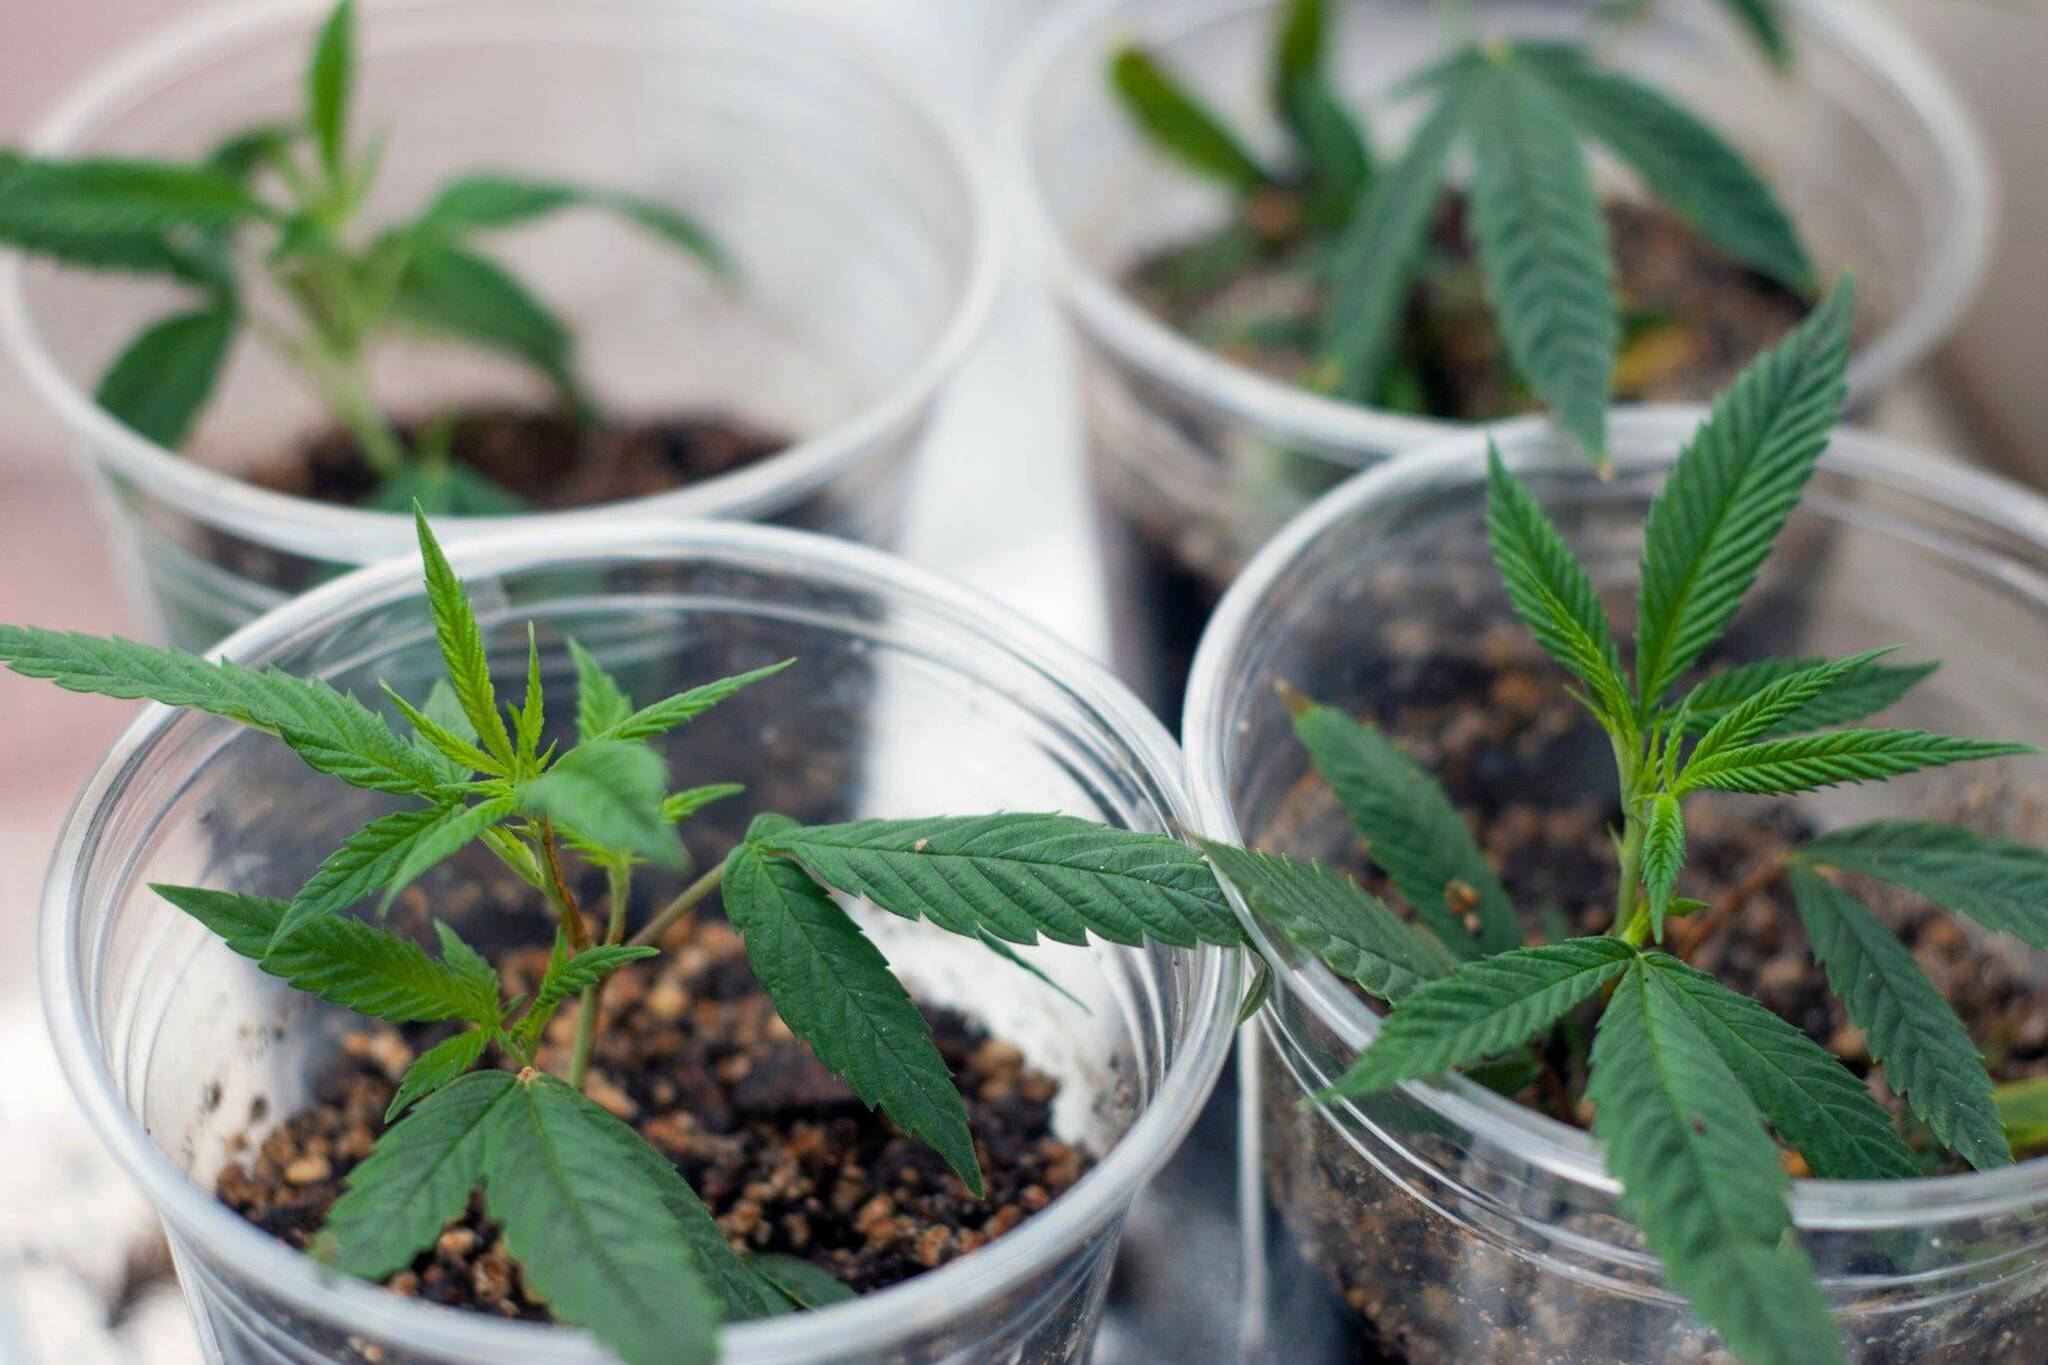 The 10 Easy Steps How To Grow Cannabis - Beginners Guide ...